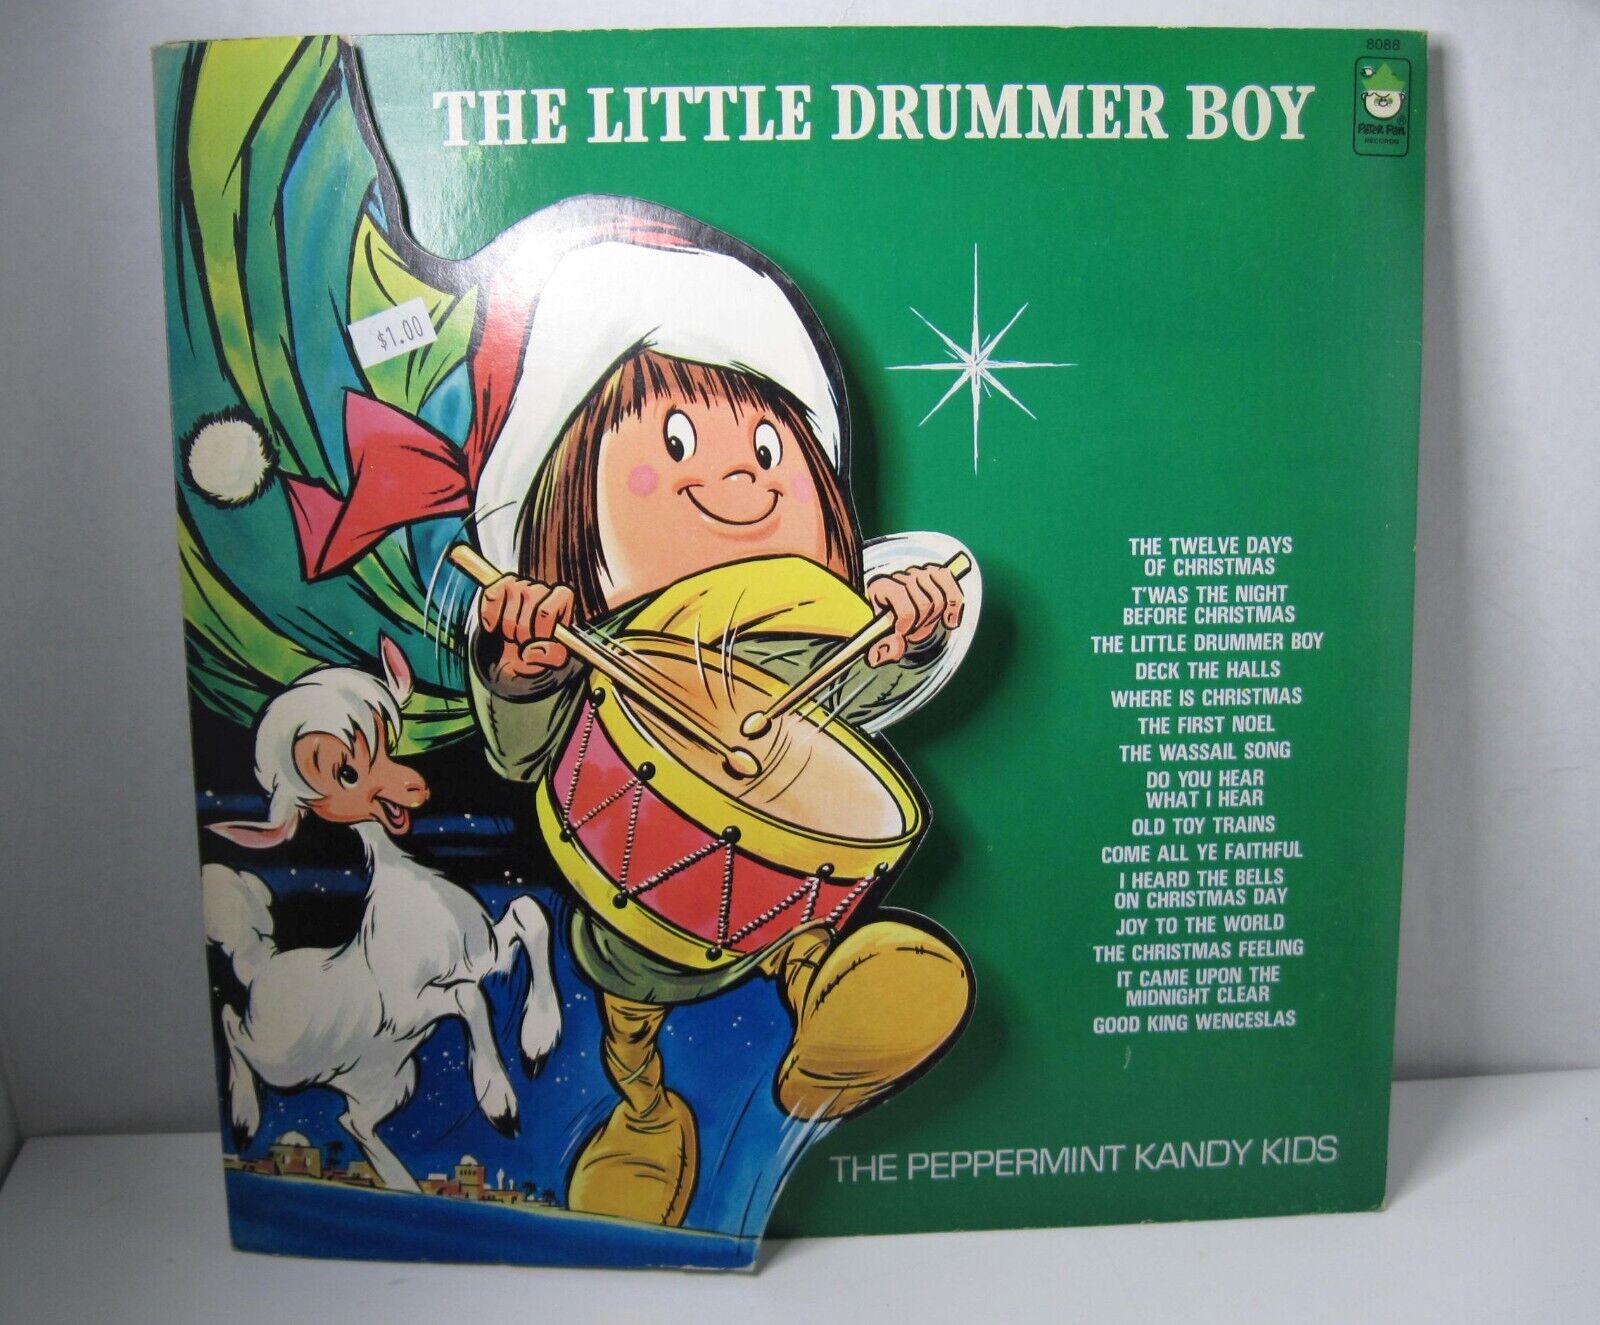 Vintage Peter Pan Records-The Peppermint Kandy Kids'  